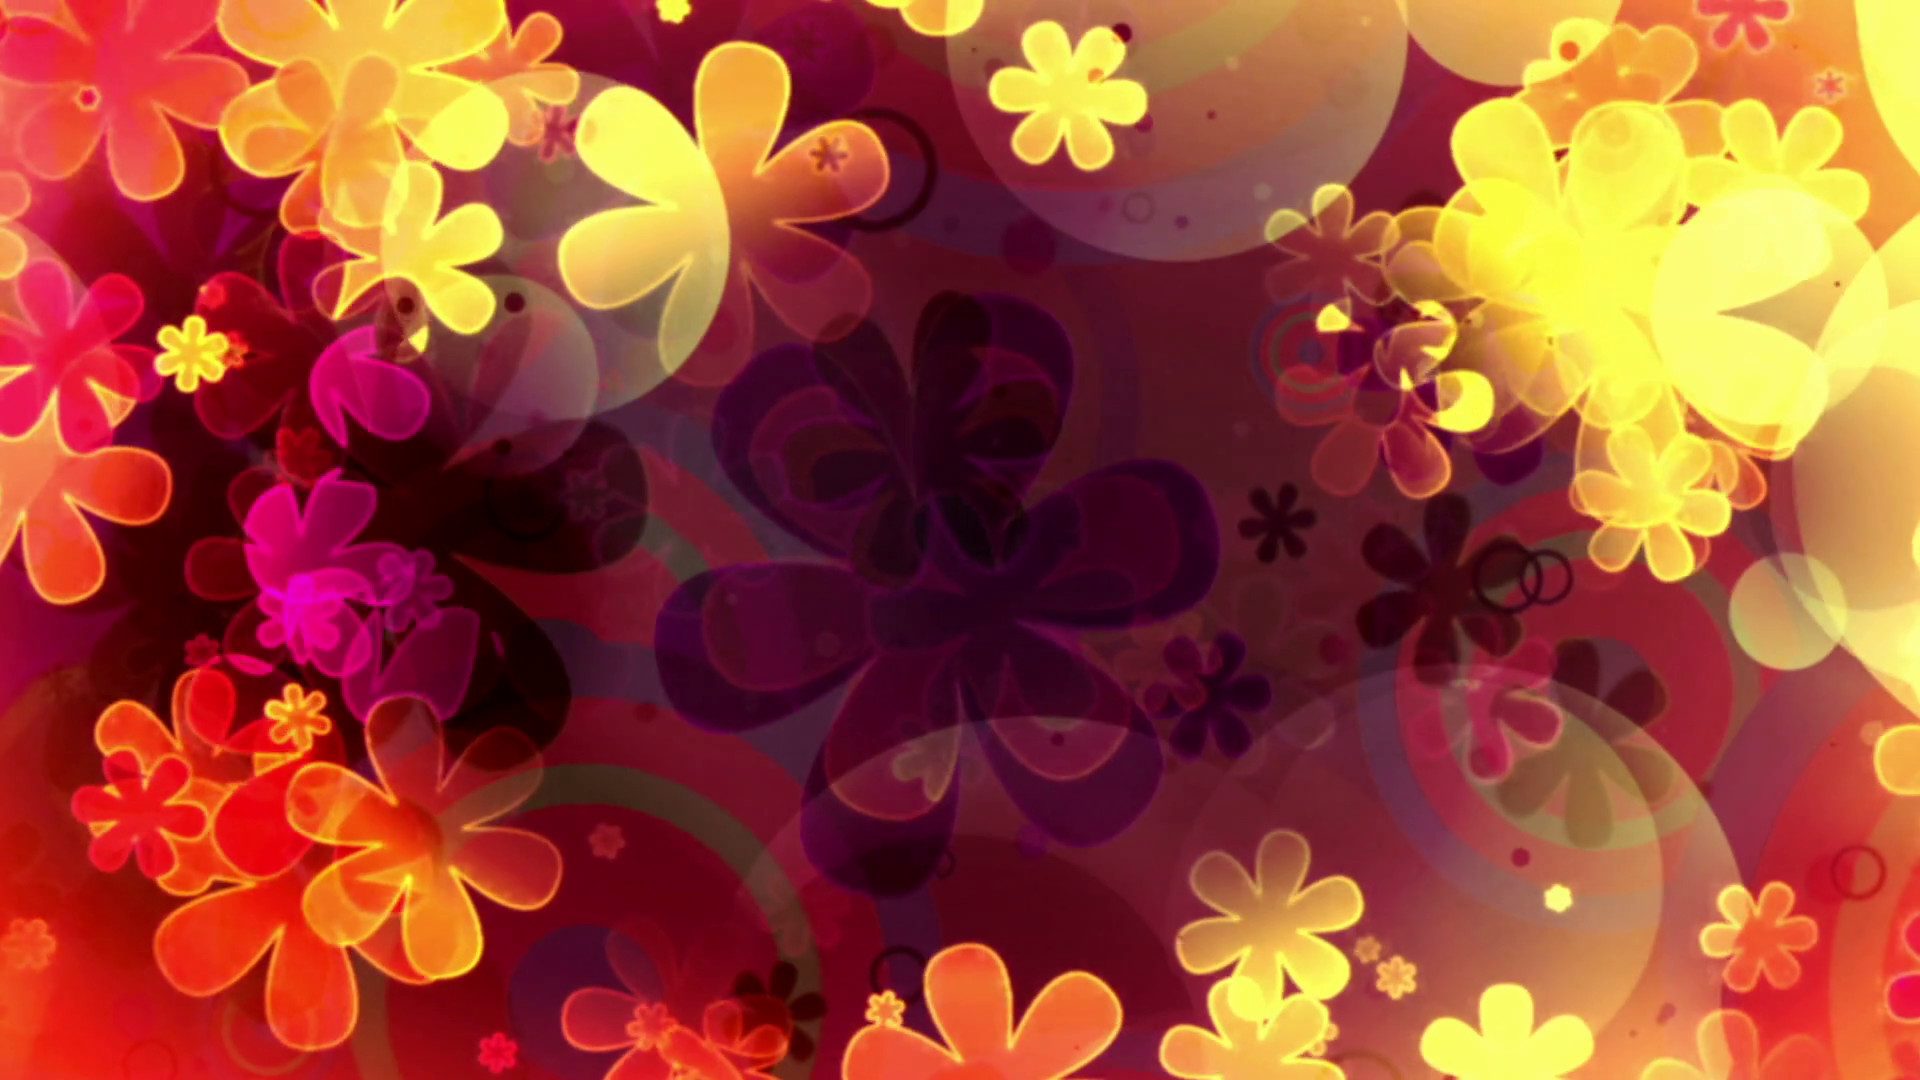 1920x1080 Retro flowers and shapes animated looping CG abstract animated background